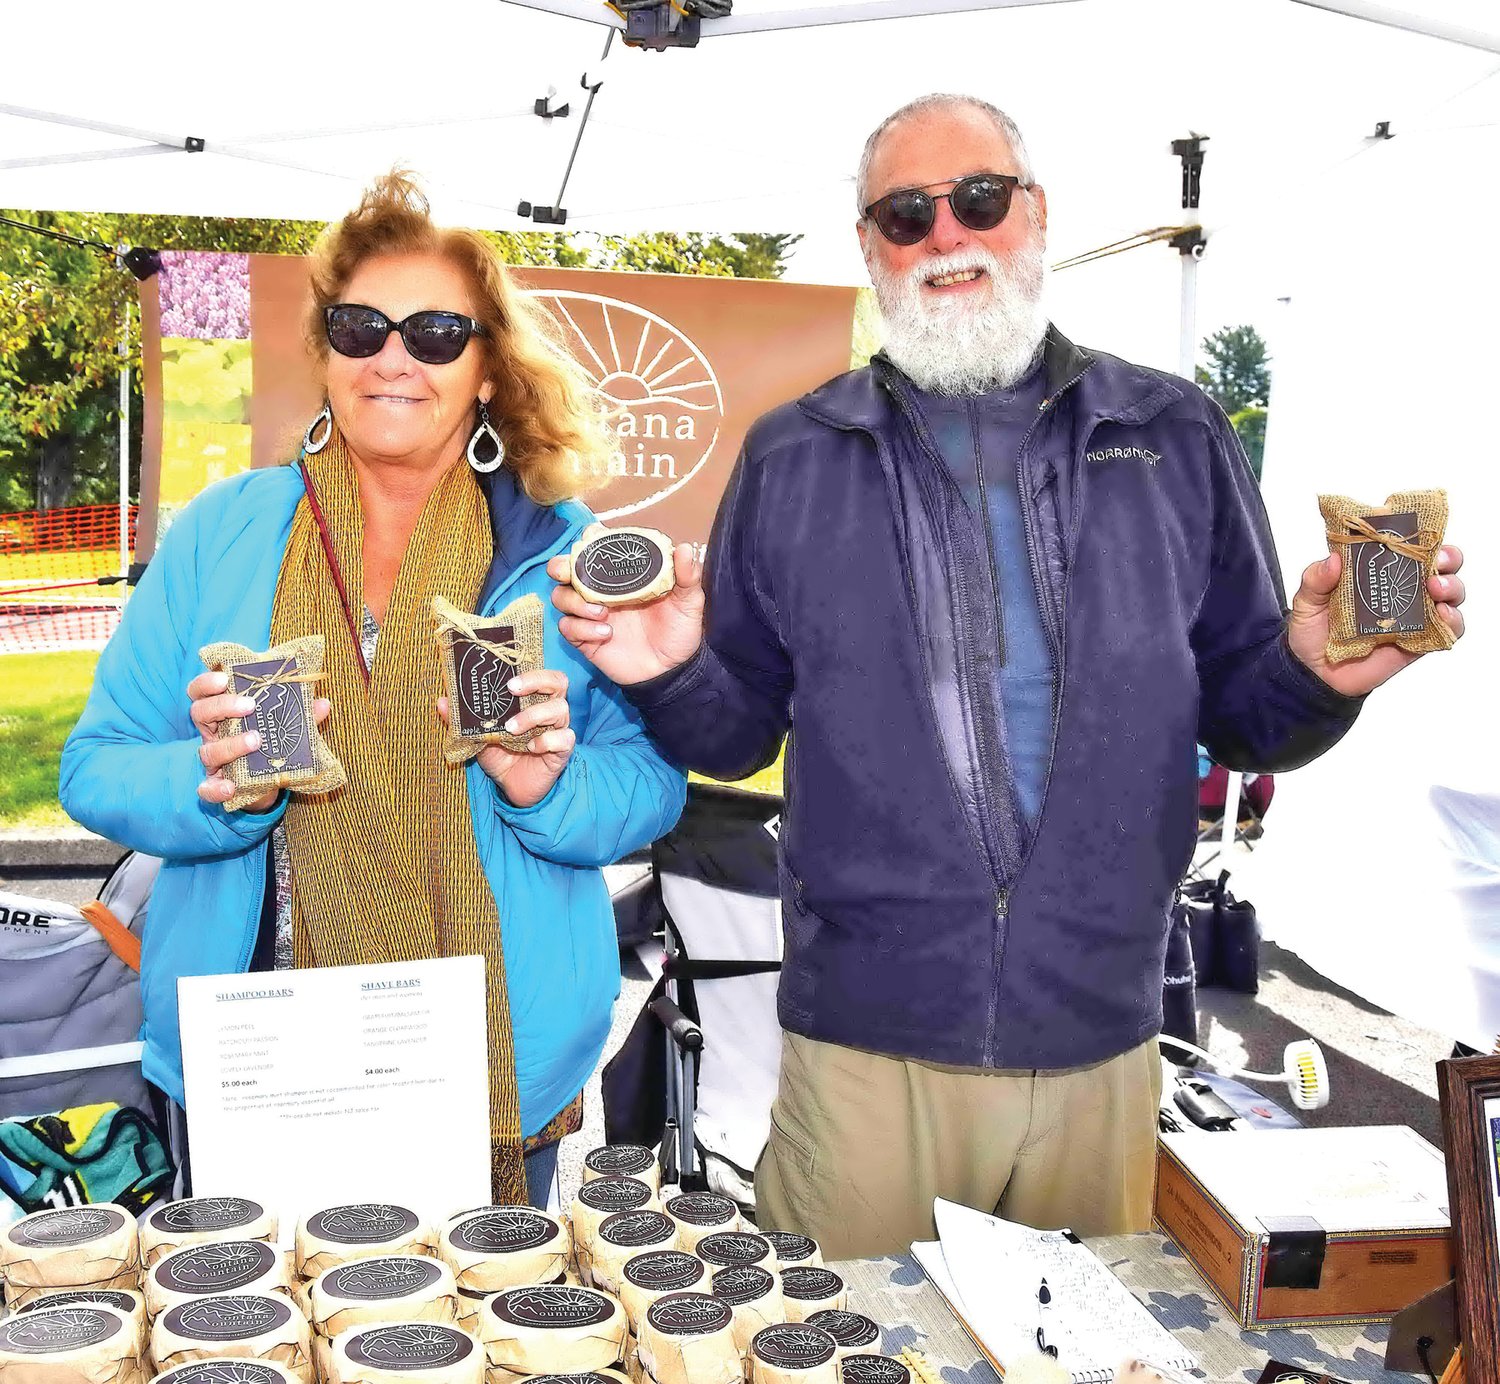 Debbie and Bill Jones with their handmade soaps and shampoos.